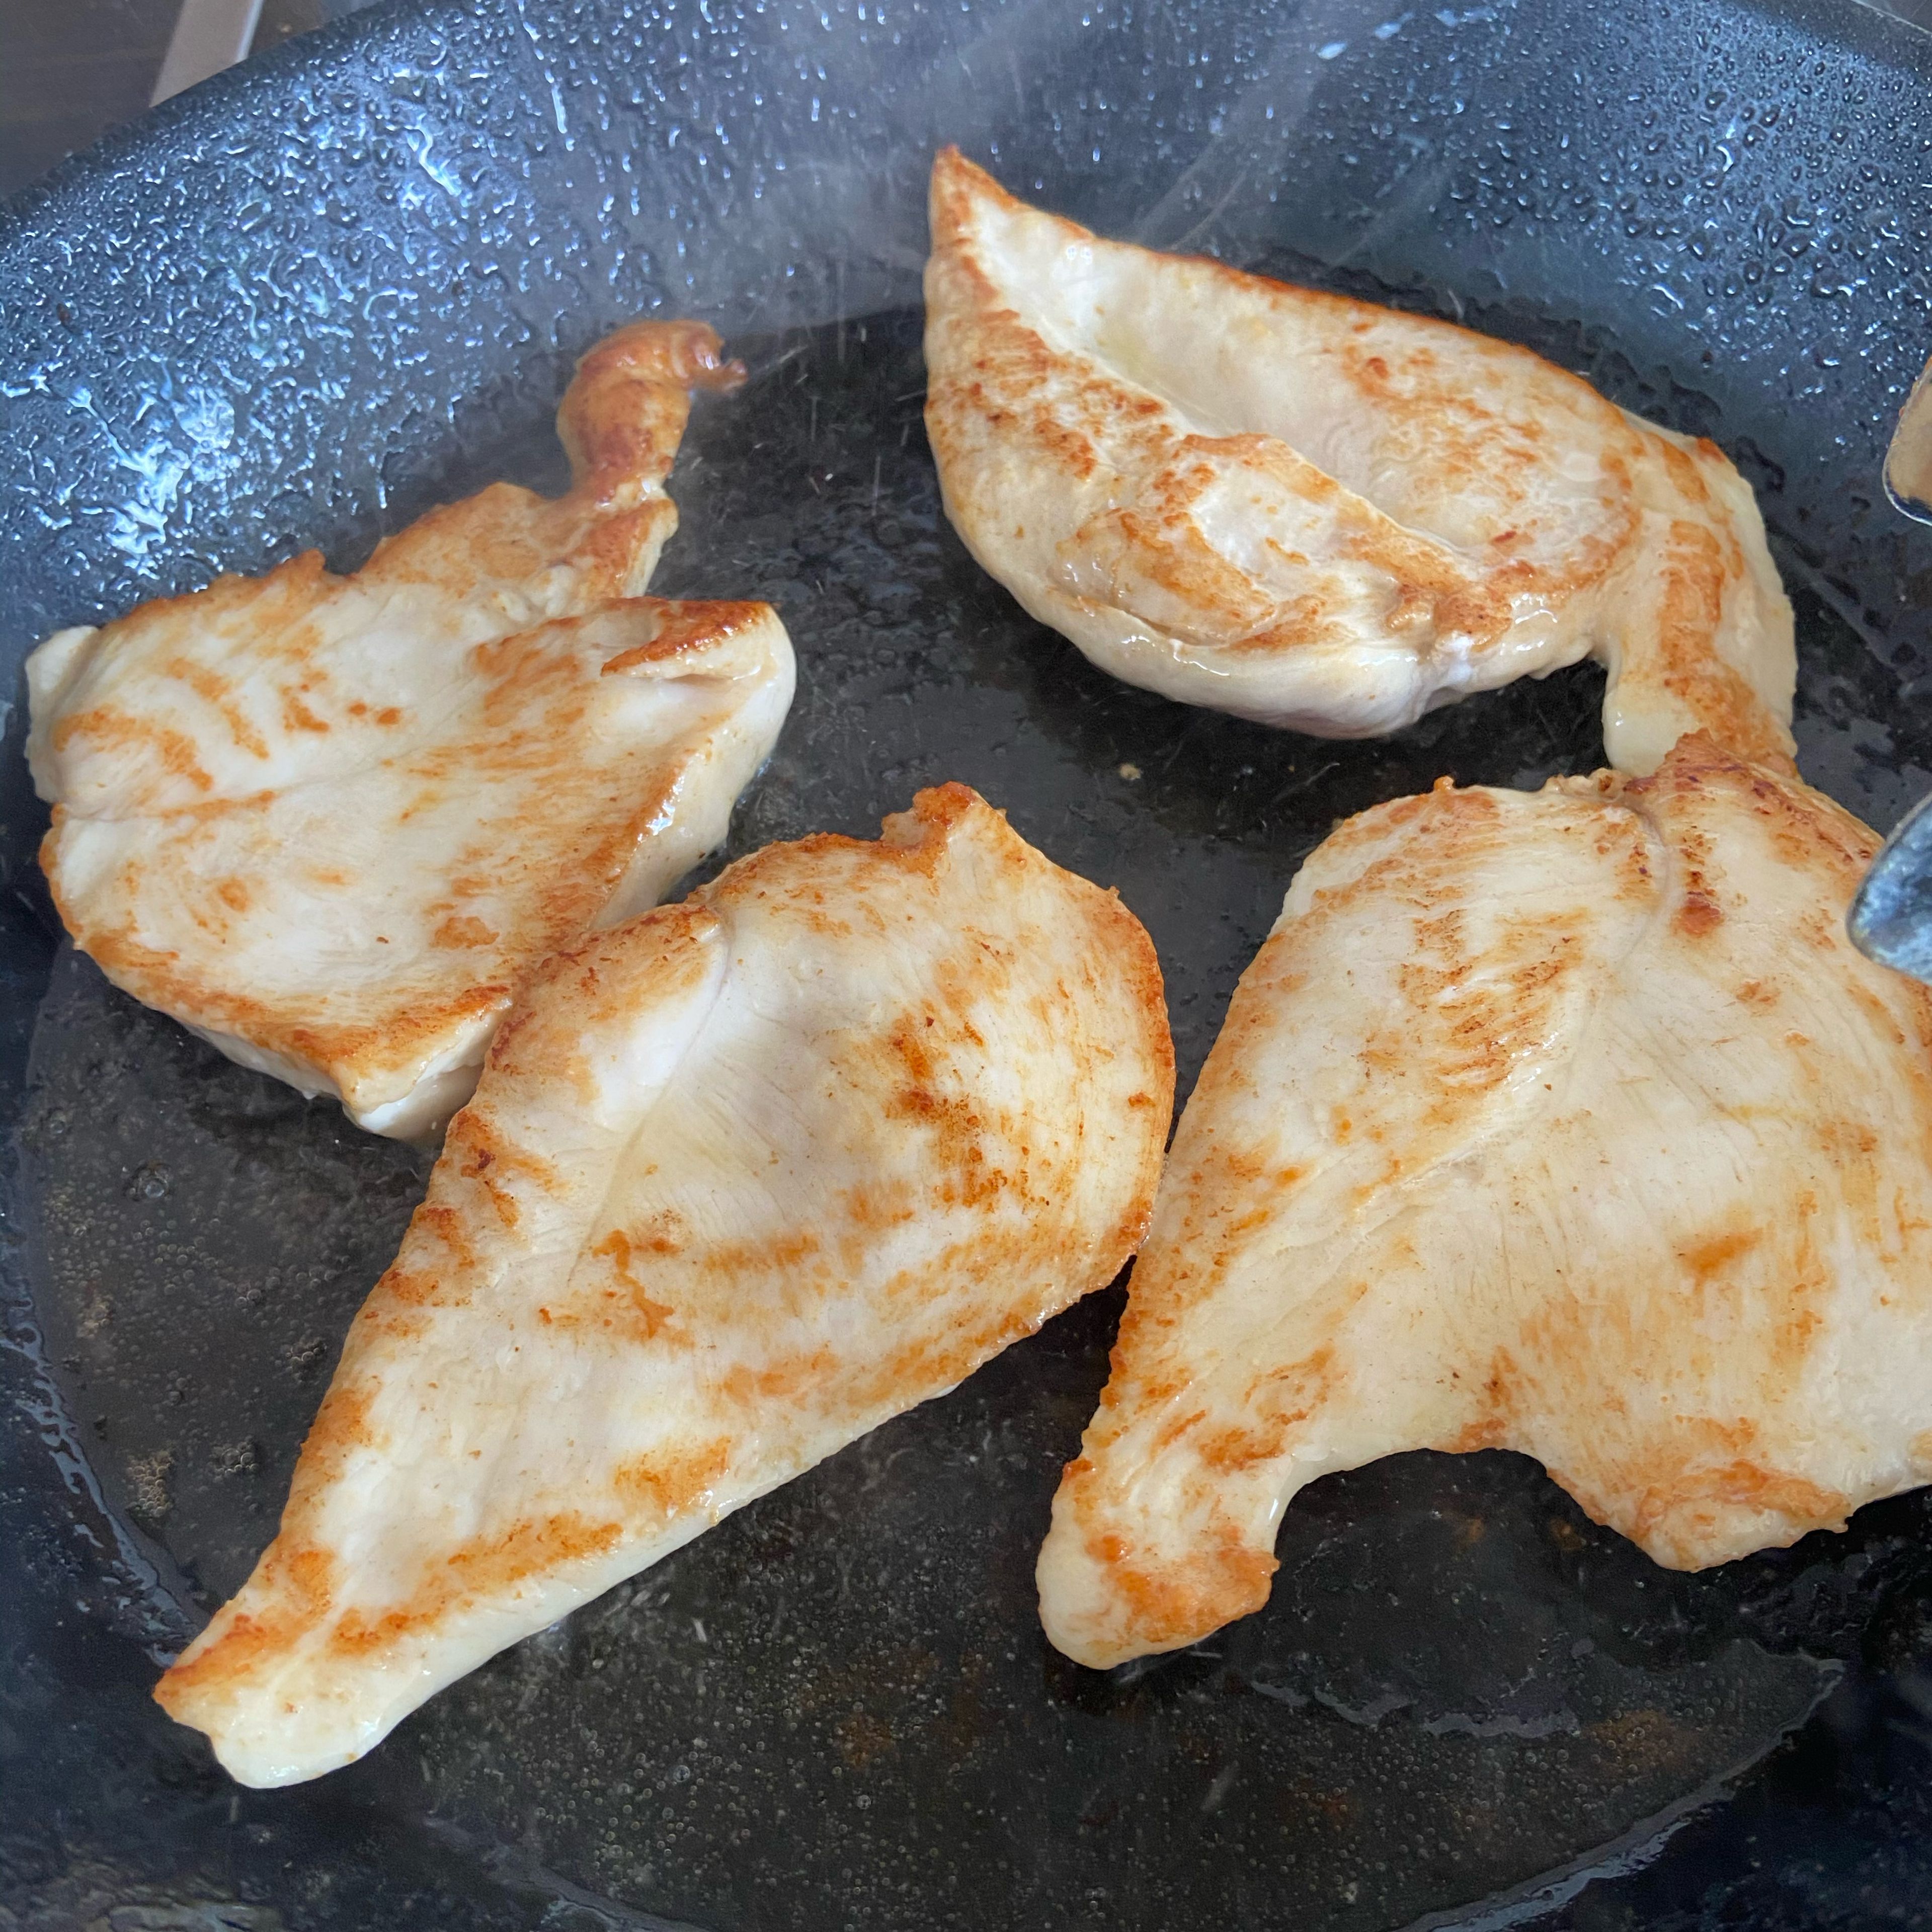 The fat from bacon will give the chicken an extra layer of flavor, so in the hot oily (from the bacon) pan, fry the chicken breasts for about 2 min each side. While frying start toasting the bread slices. It’s important to toast the bread, otherwise it will be soggy and the sandwich wouldn’t hold.